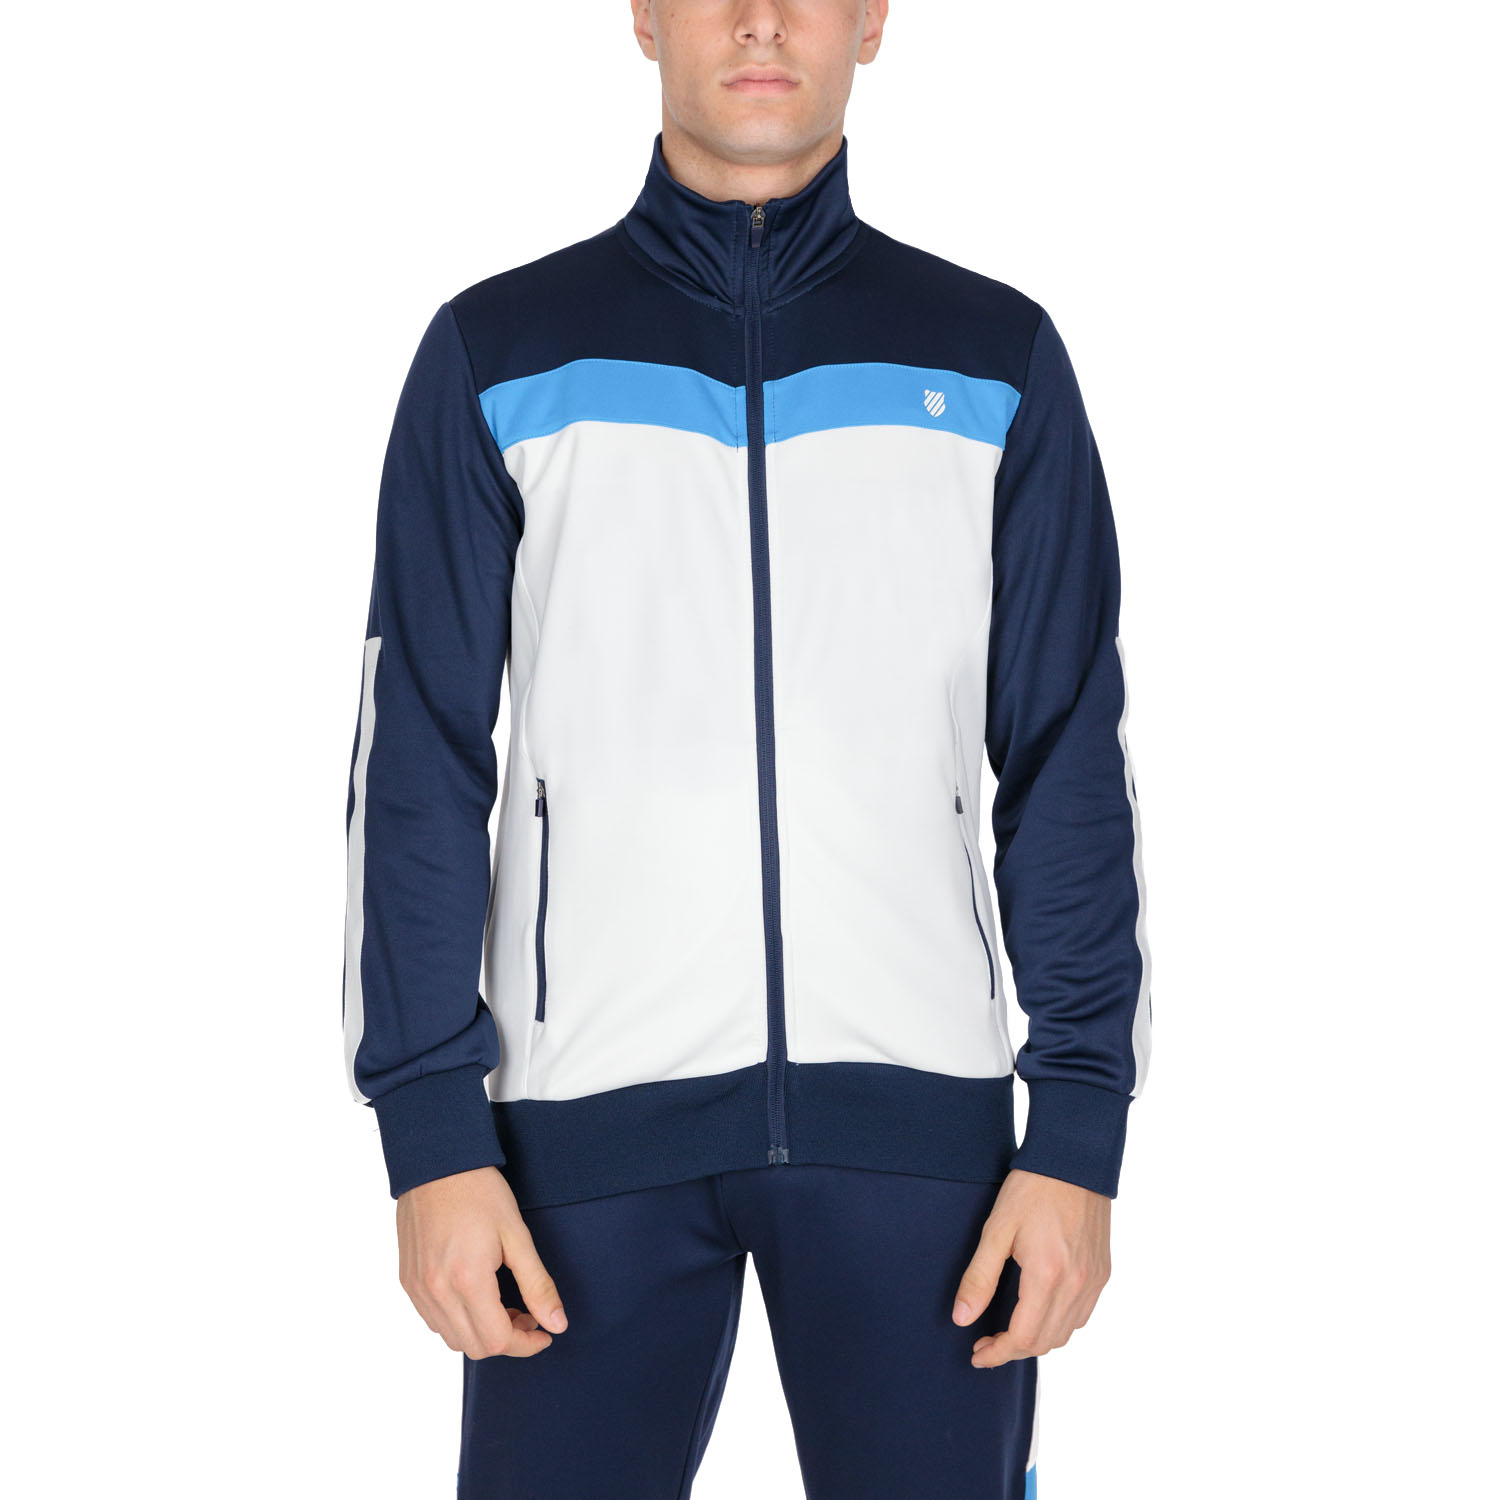 K-Swiss Black Done Track Jacket - Men | Best Price and Reviews | Zulily